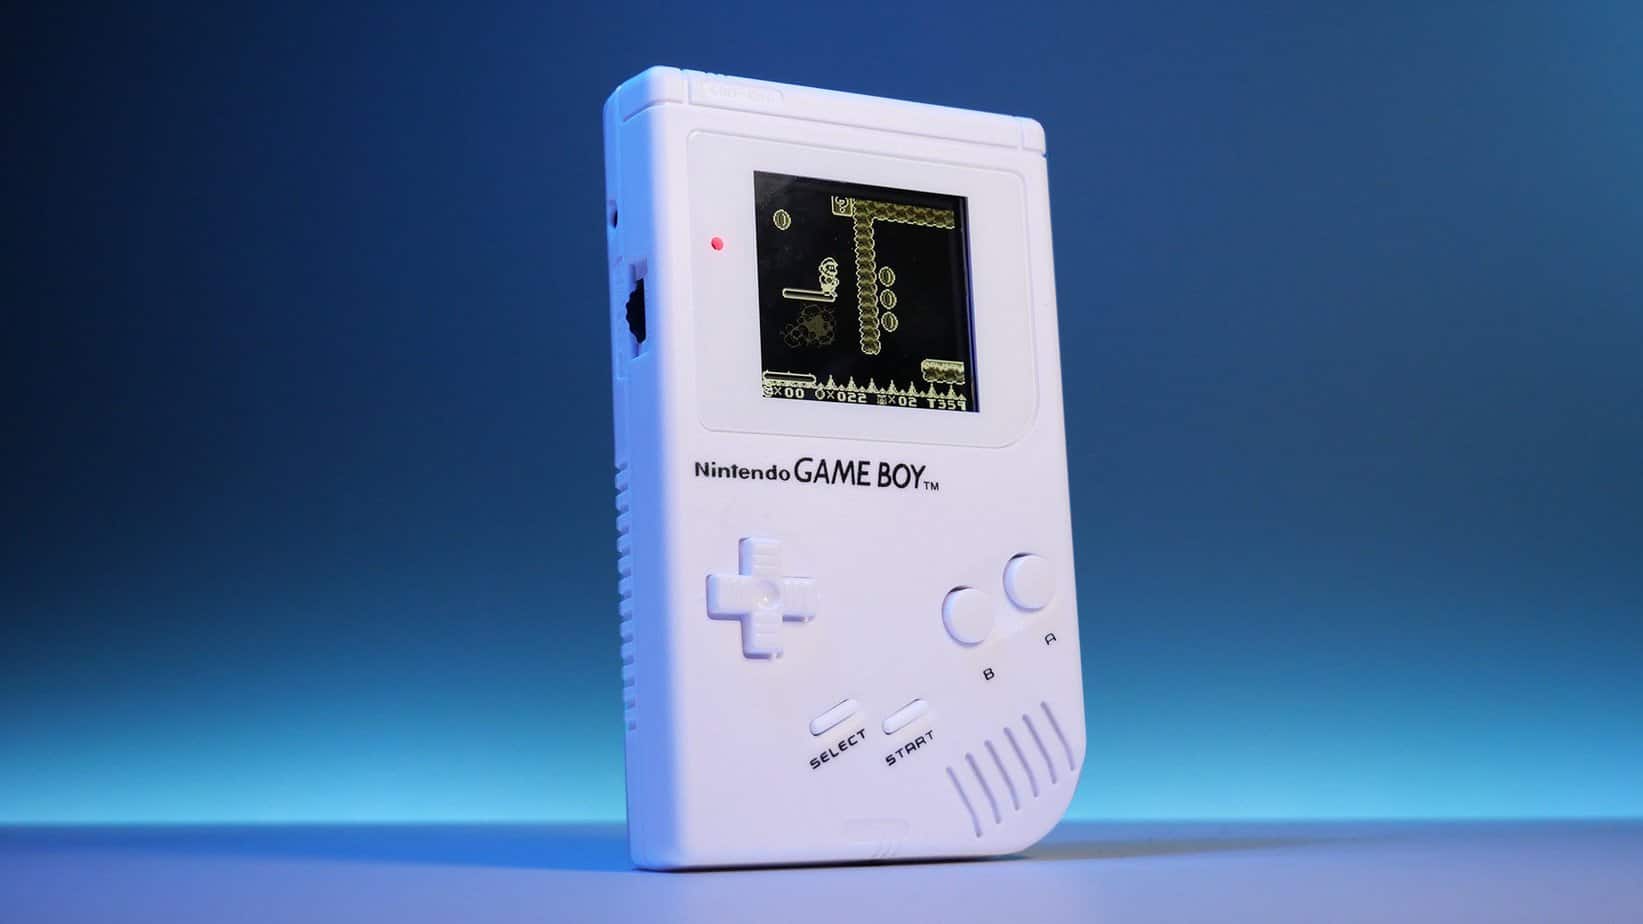 Modded Gameboy - Should You Buy One?